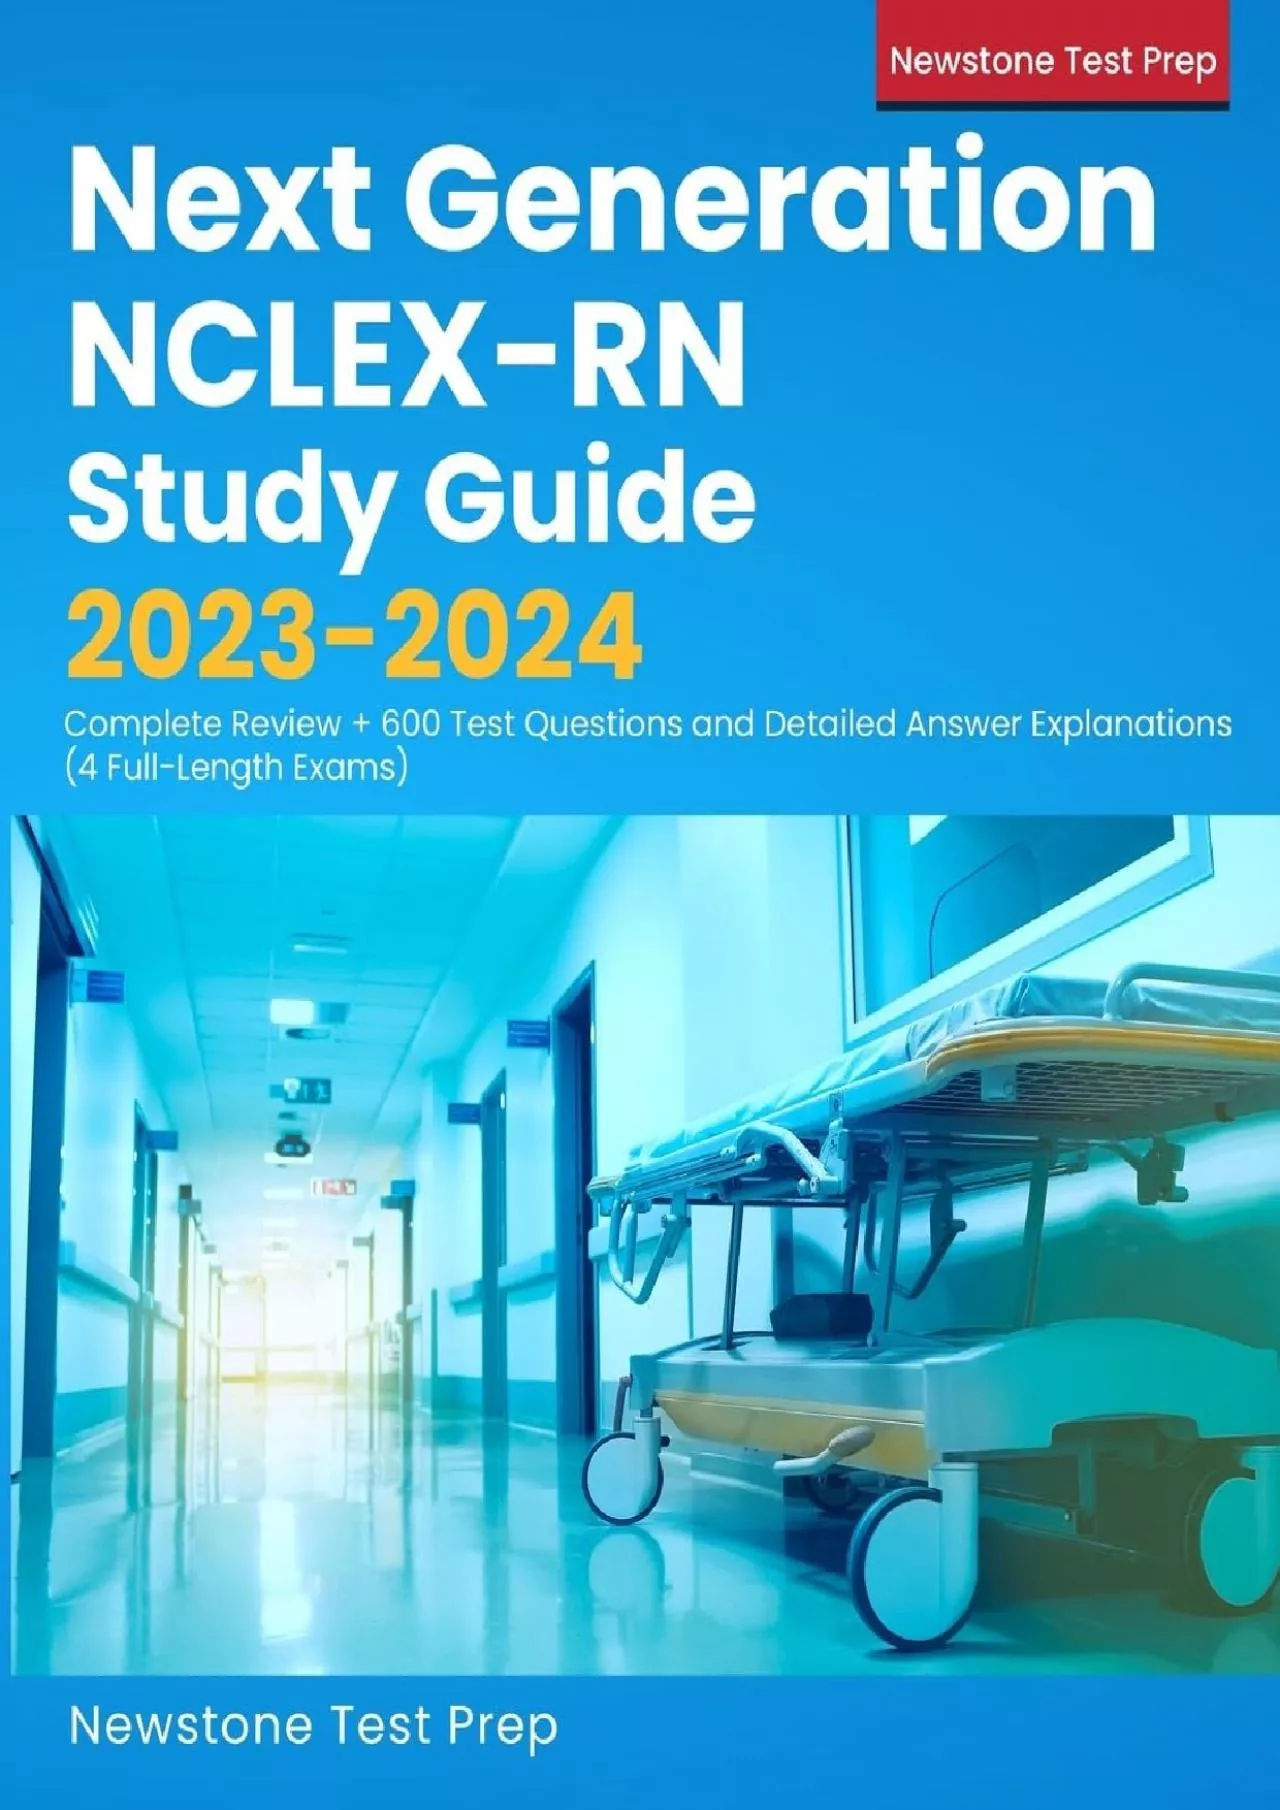 [READ] Next Generation NCLEX-RN Study Guide 2023-2024: Complete Review + 600 Test Questions